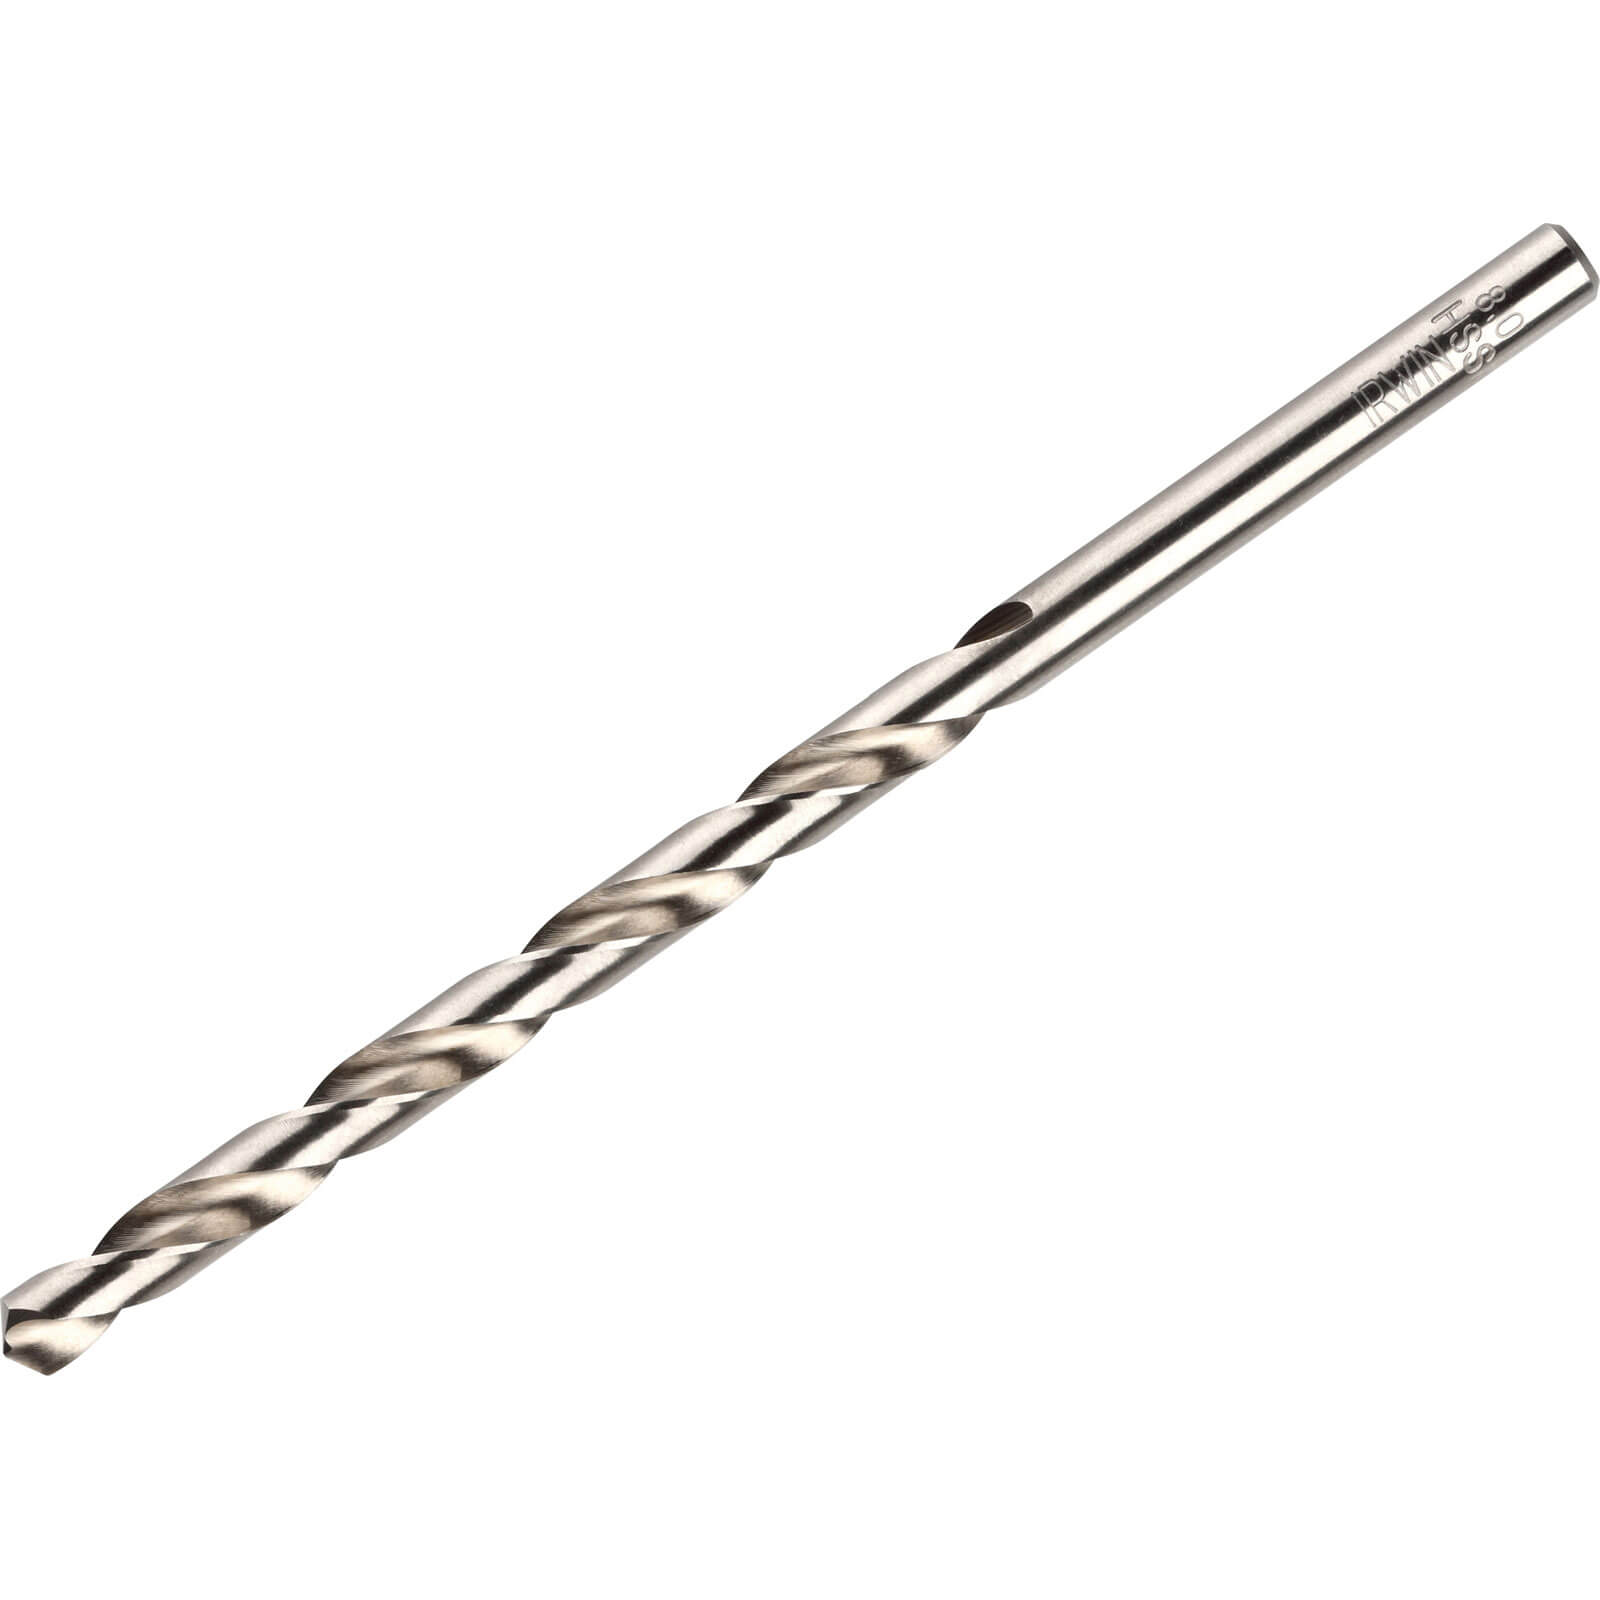 Photo of Irwin Hss Pro Drill Bits 11.5mm Pack Of 5